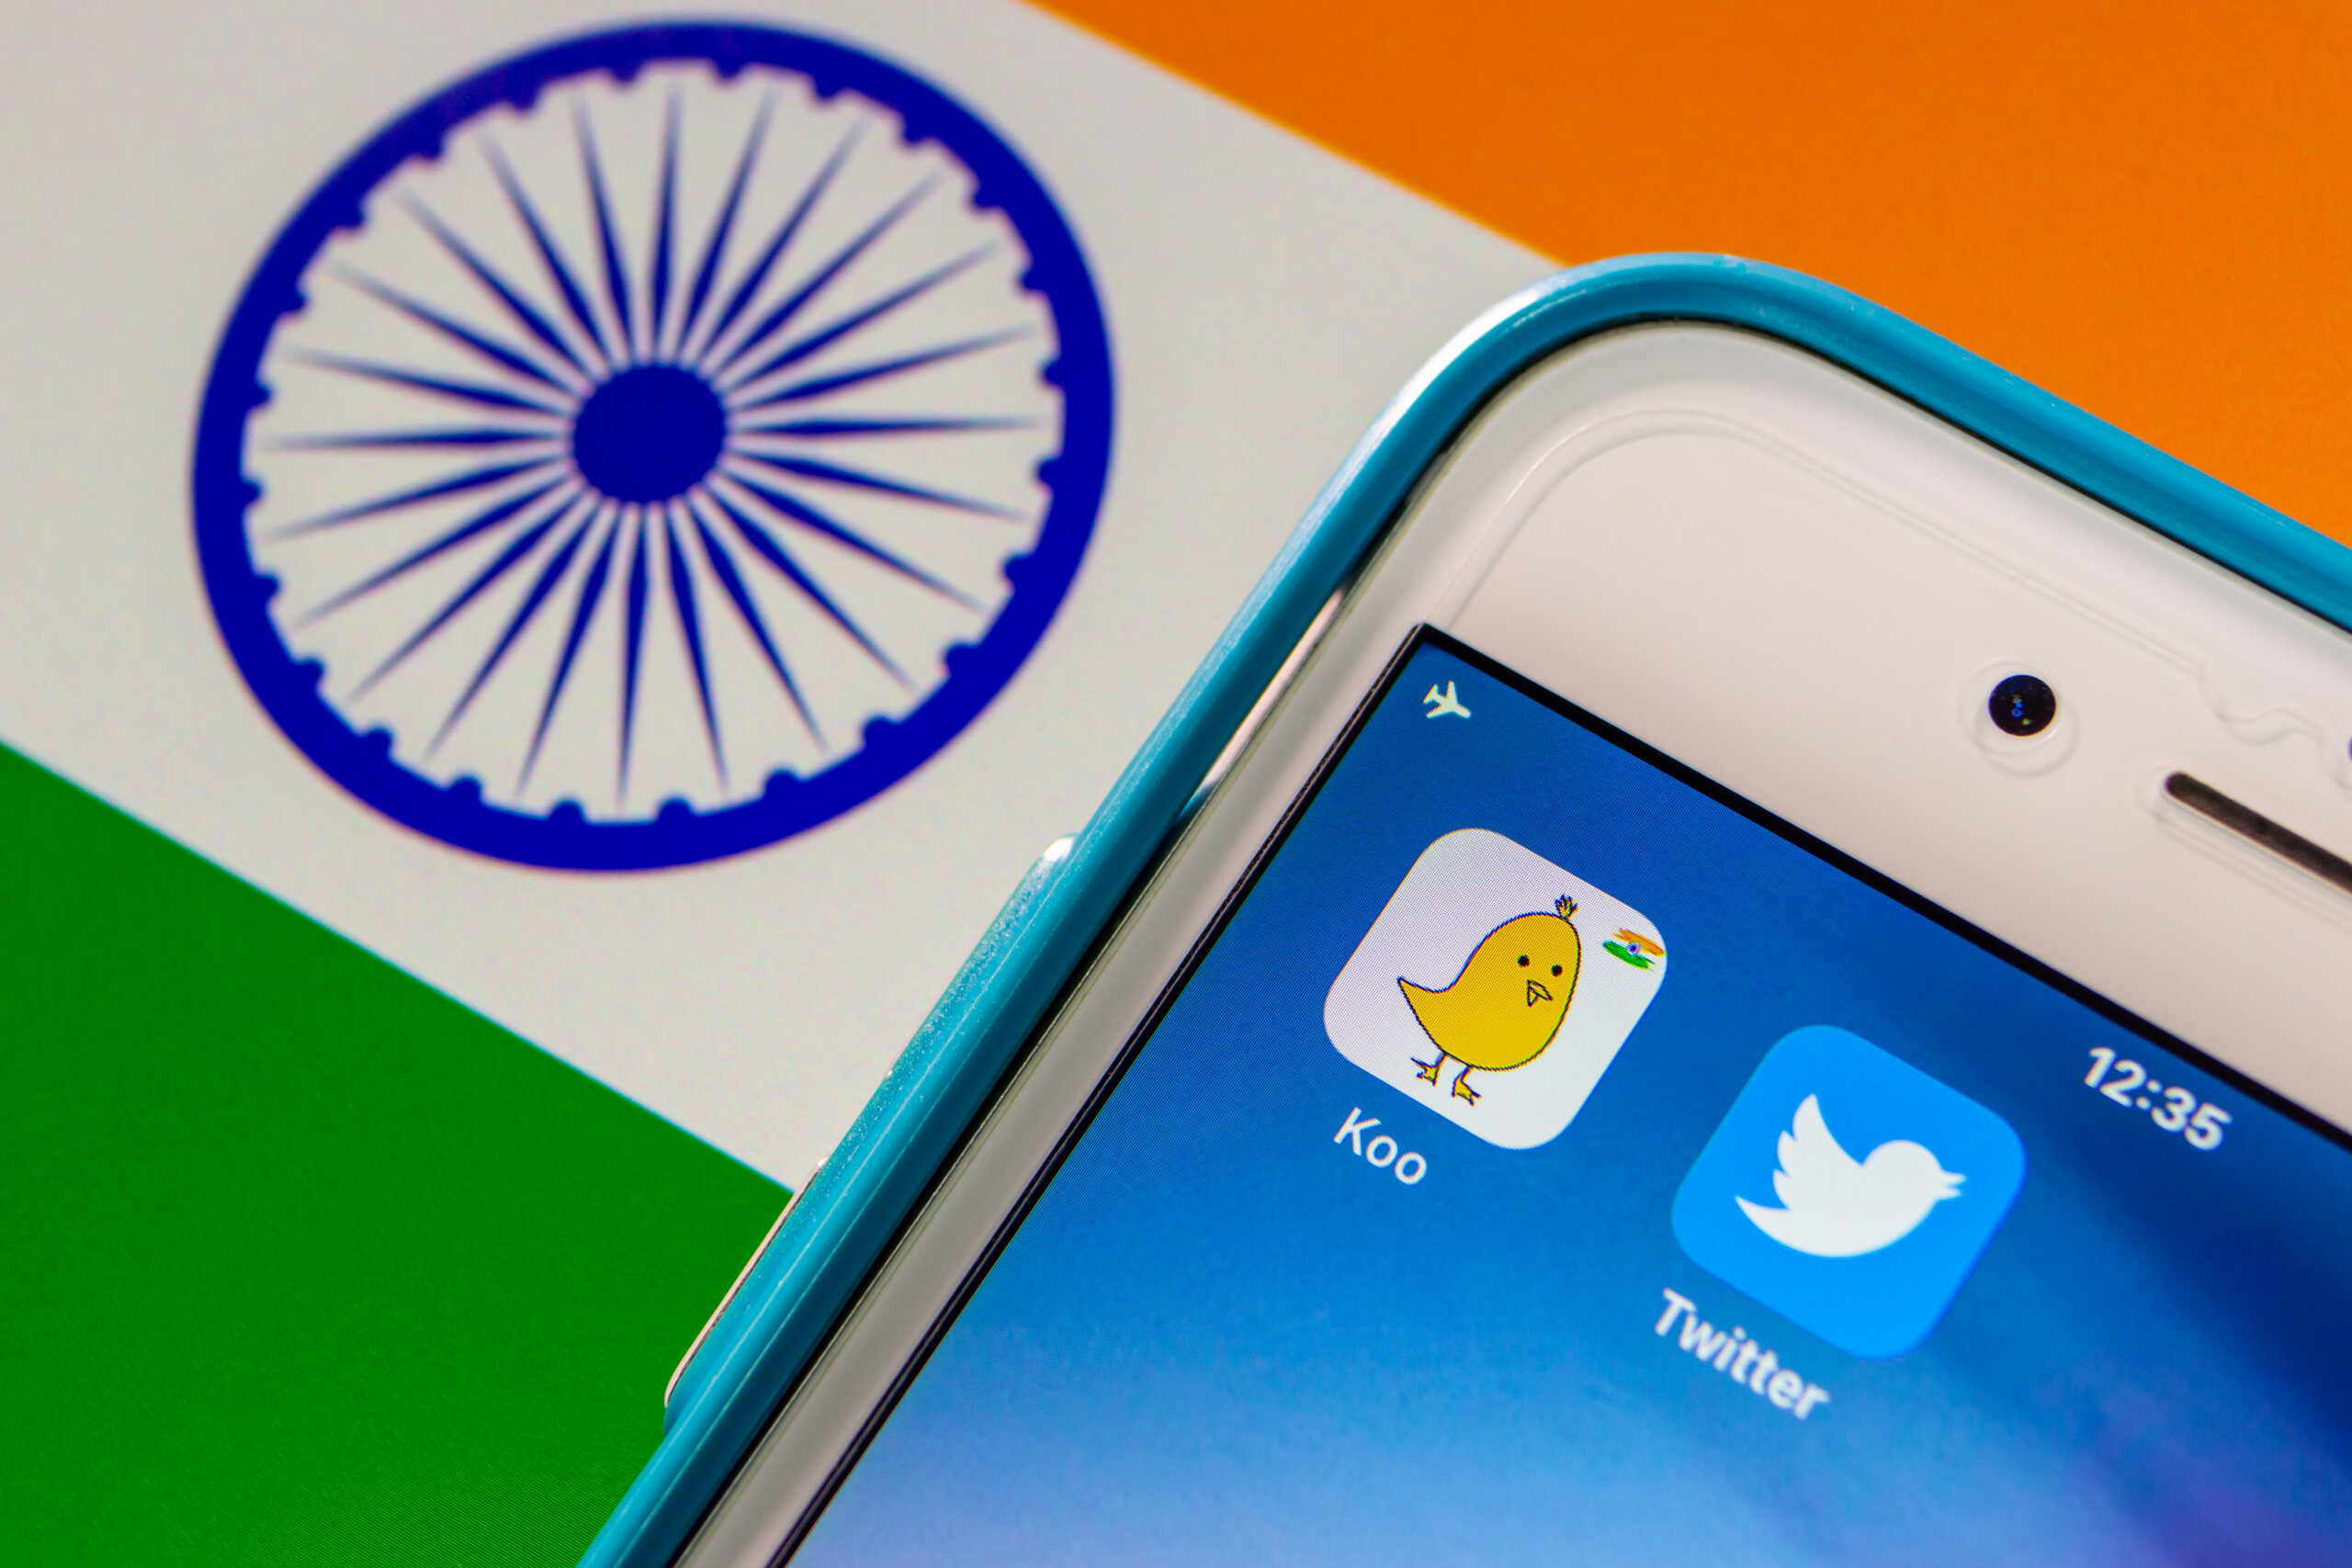 Koo, Twitter's rival in India, is integrating ChatGPT for posts creation